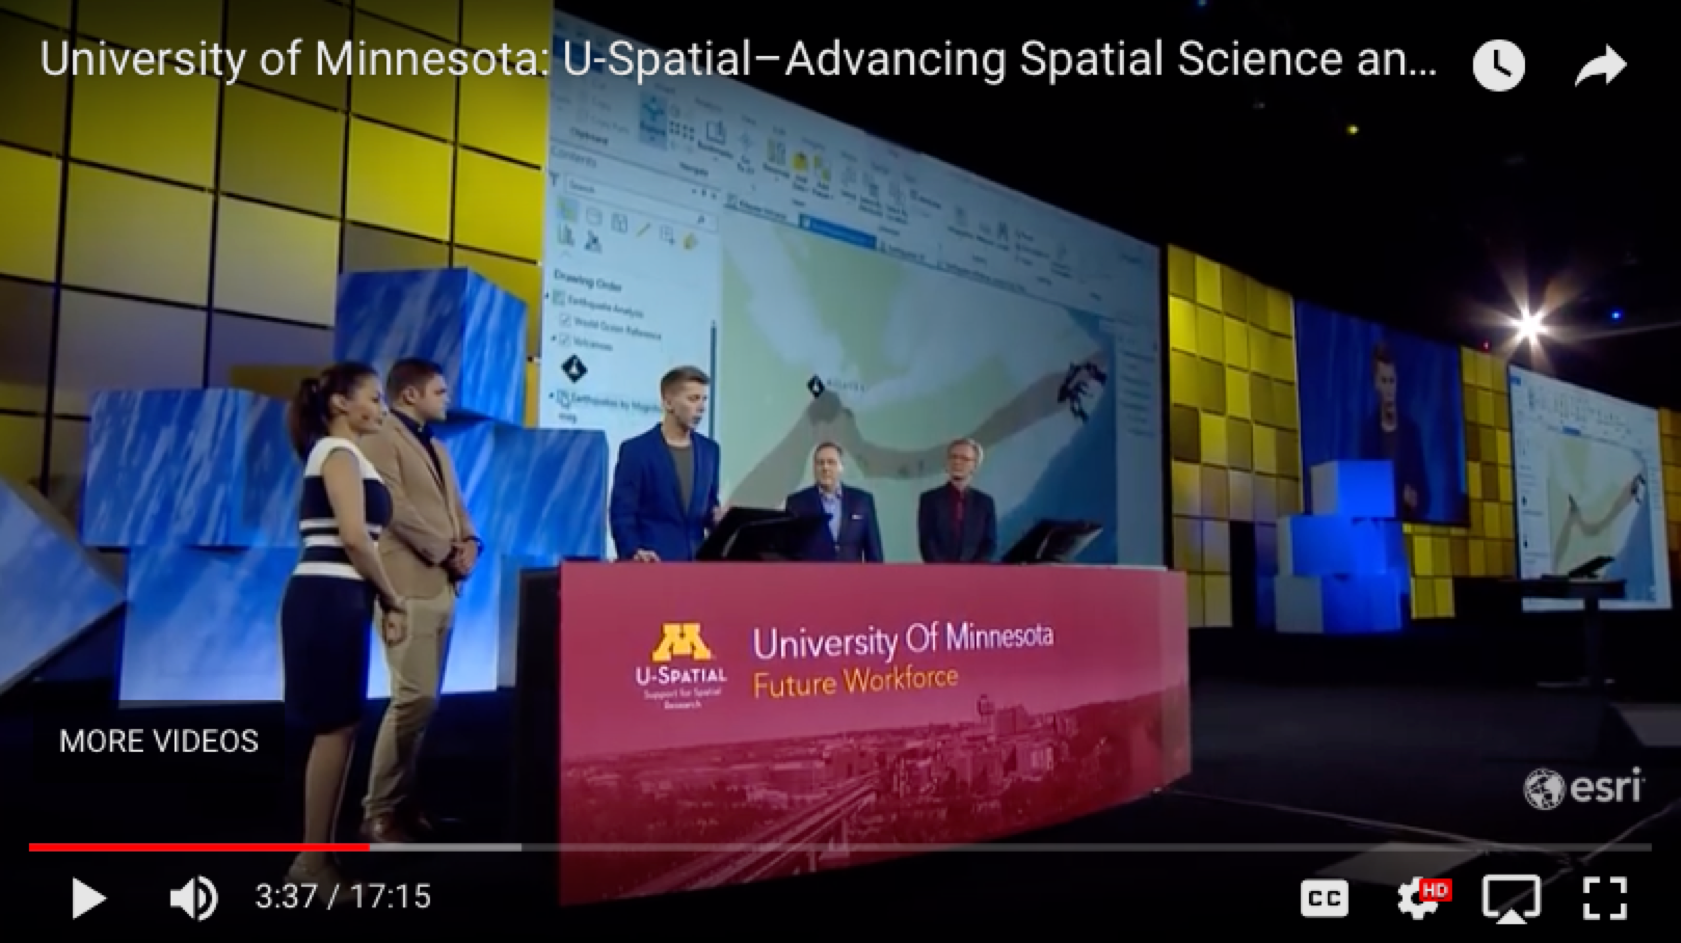 Coleman Shepherd presents with University of Minnesota colleagues at the 2018 Esri User Conference plenary session